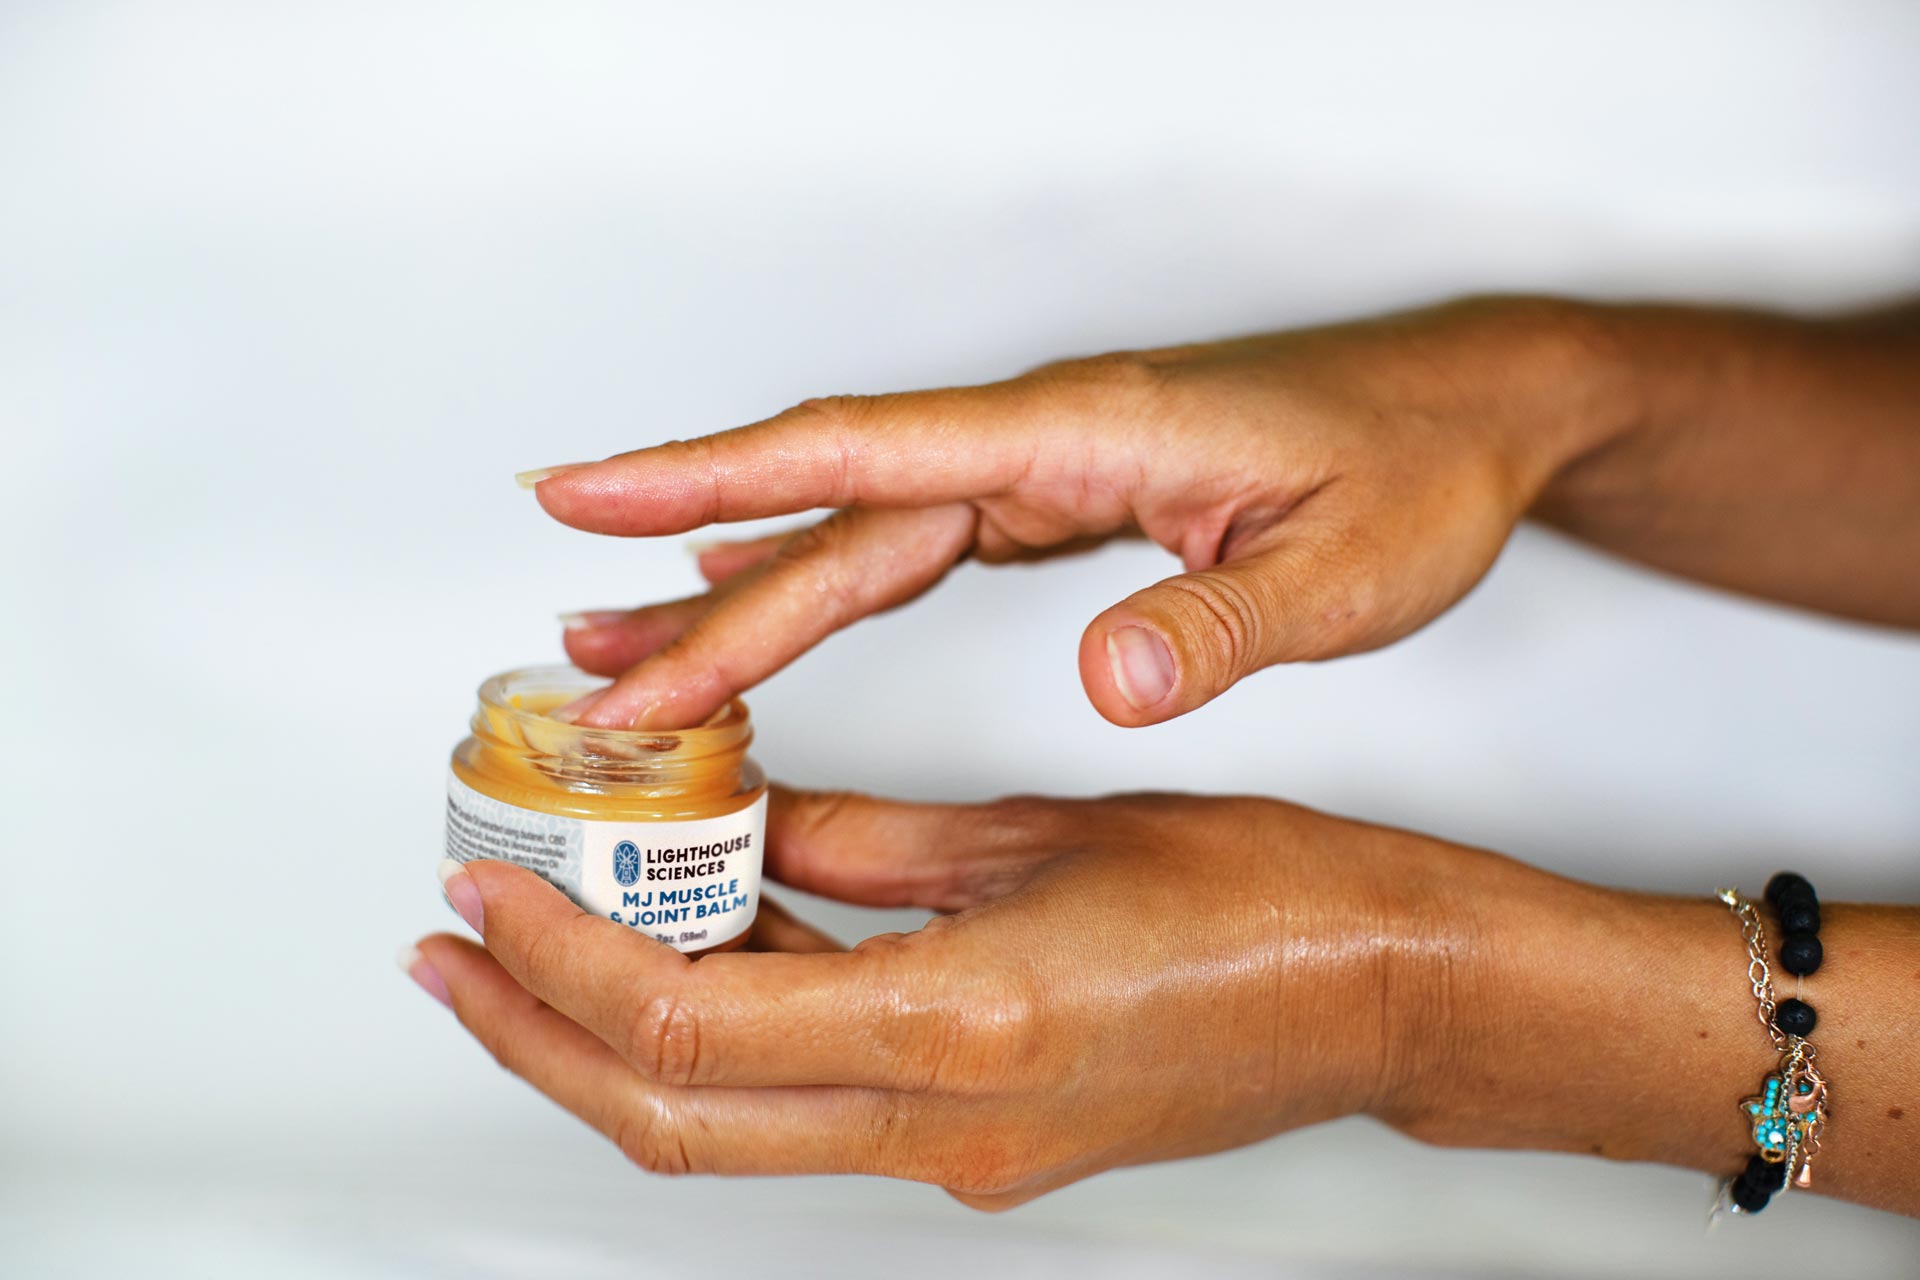 finger dipping into jar of Lighthouse Science balm